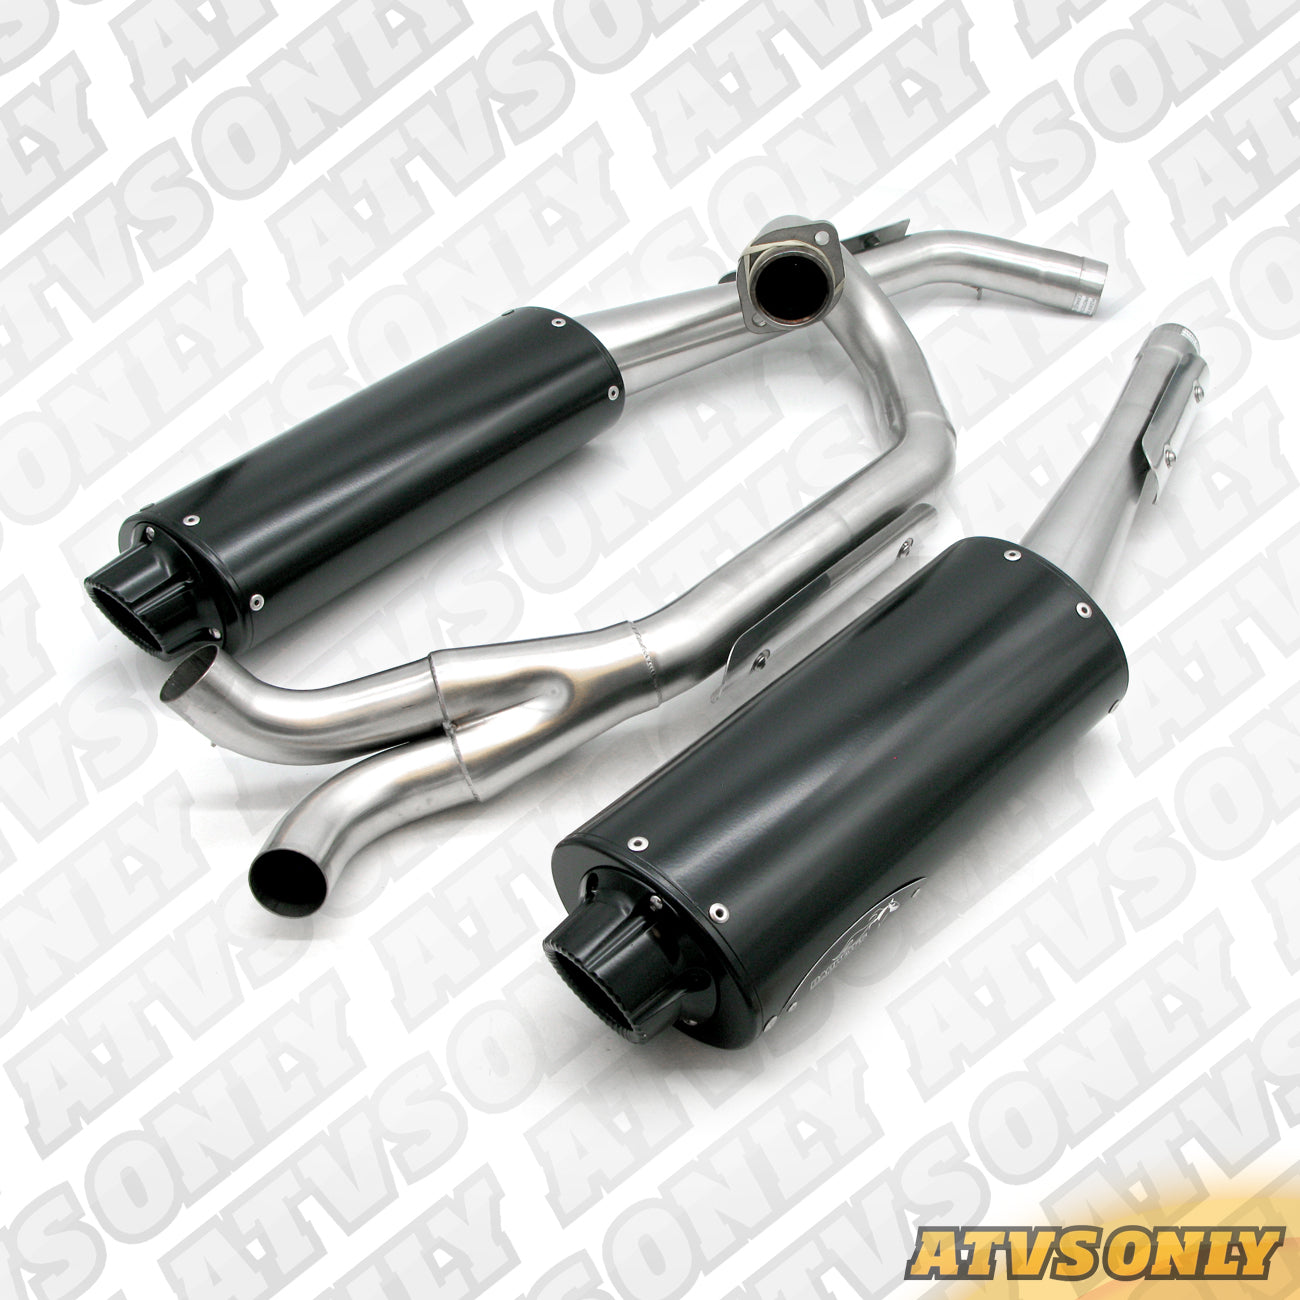 Exhaust - Full Twin Oval System for Yamaha Raptor 700